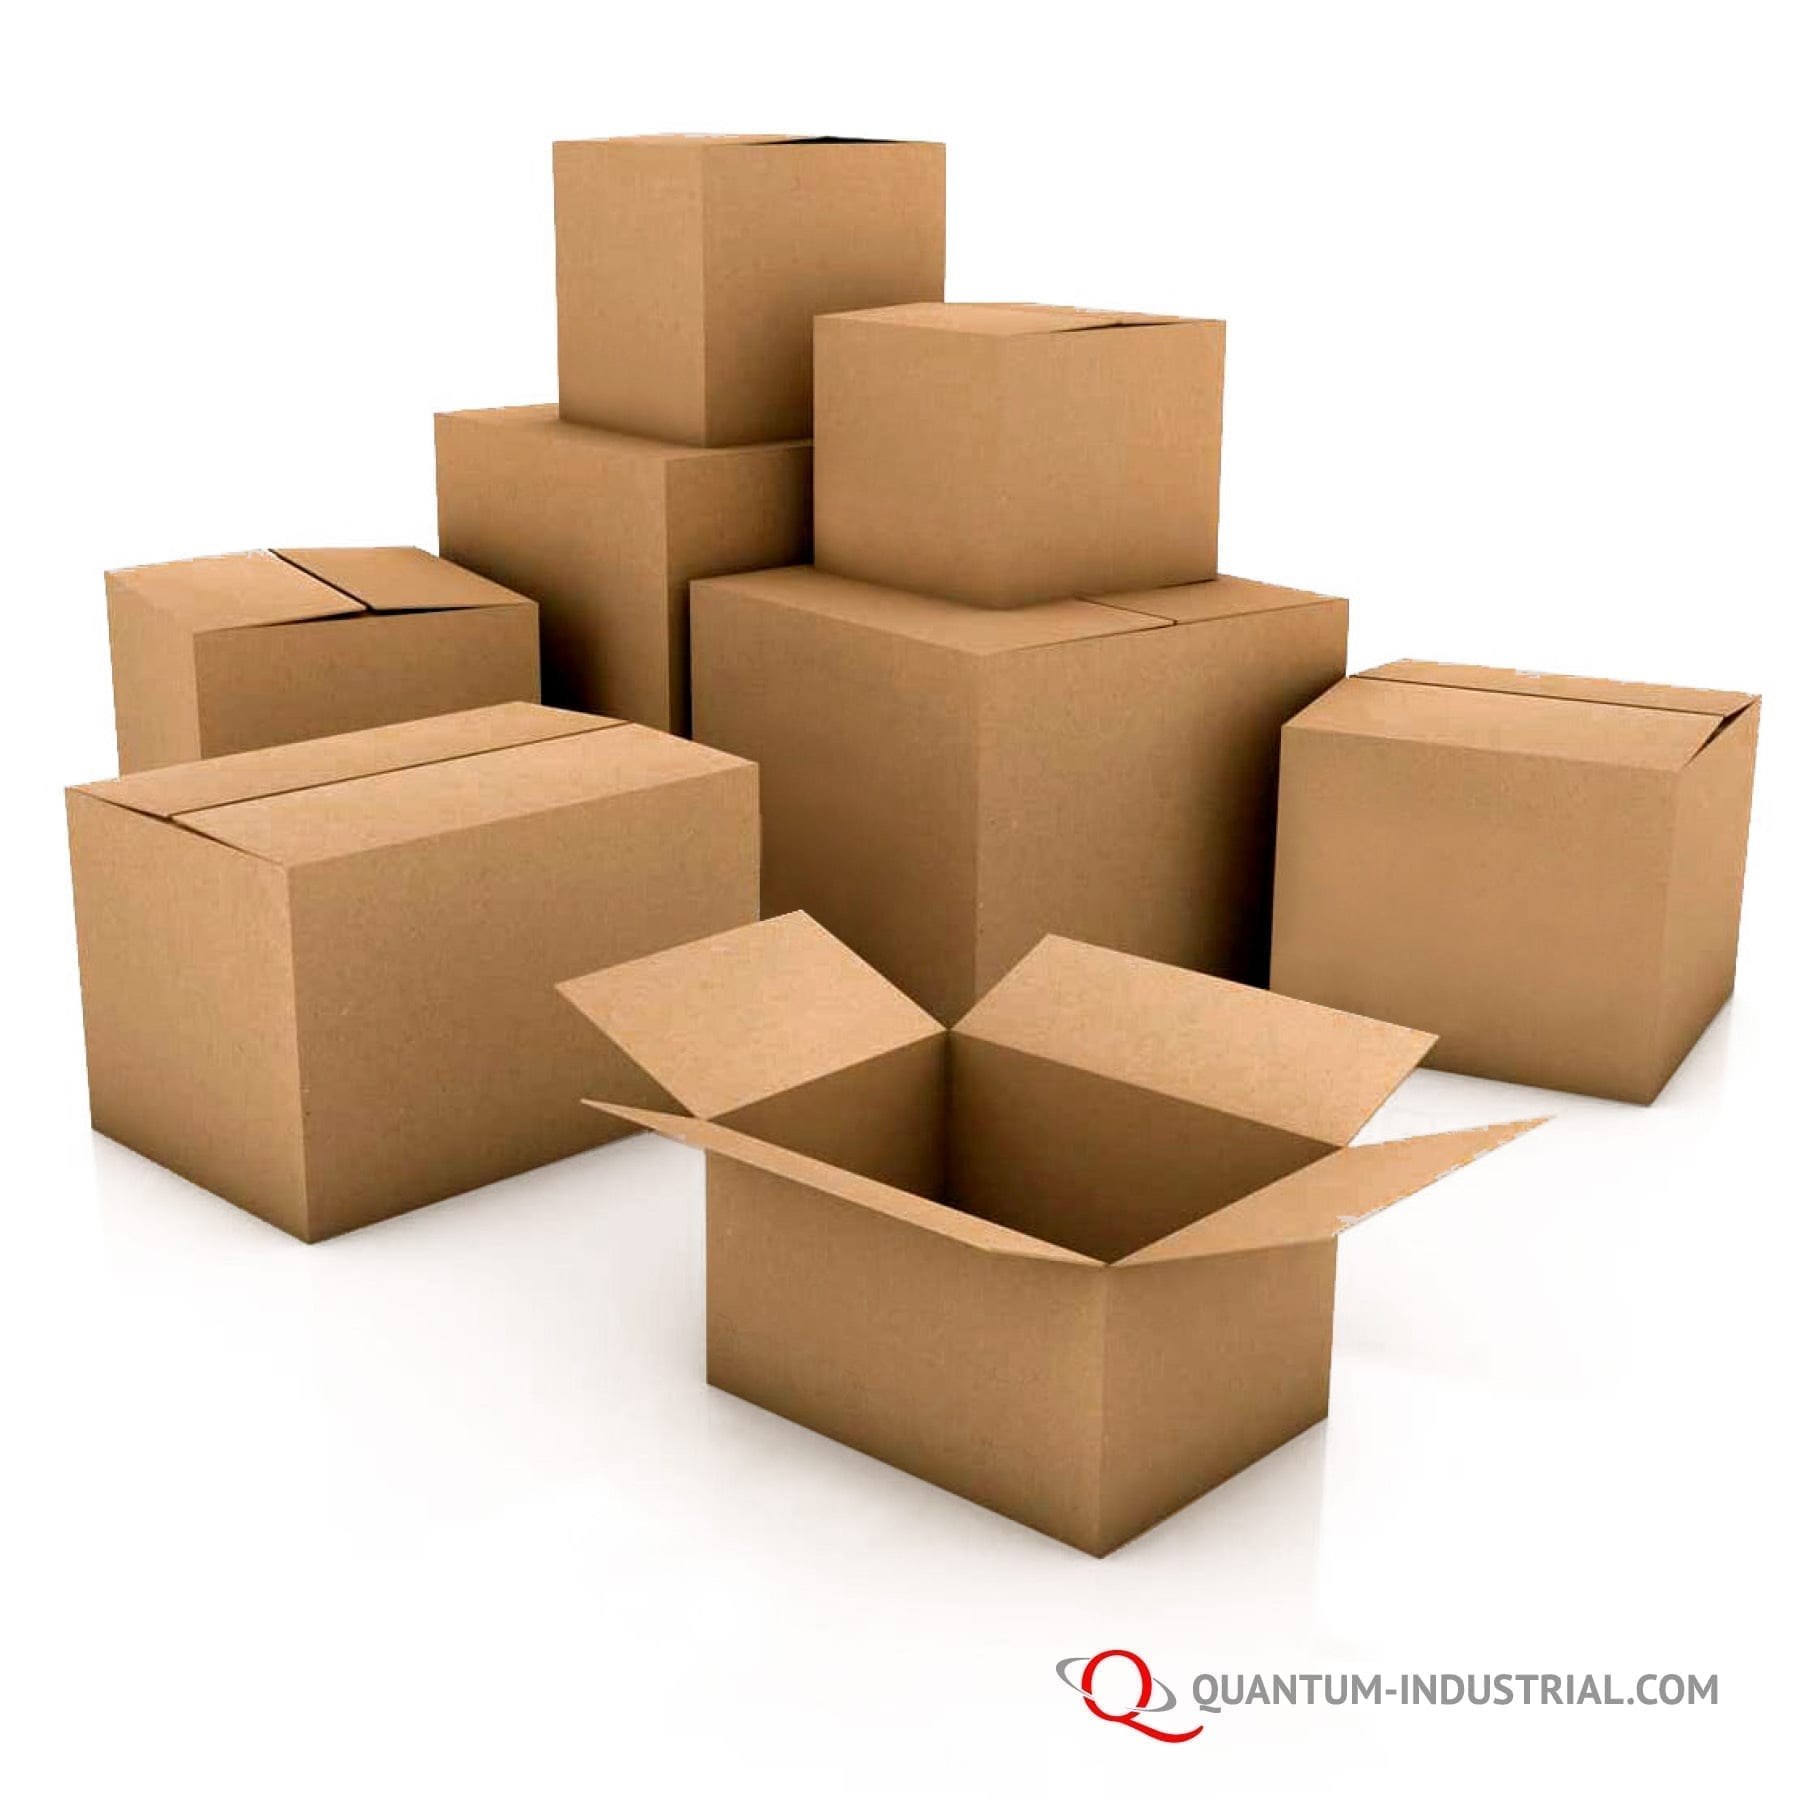 25 10x10x14 Cardboard Shipping Boxes Cartons Packing Moving Mailing Box Storage 